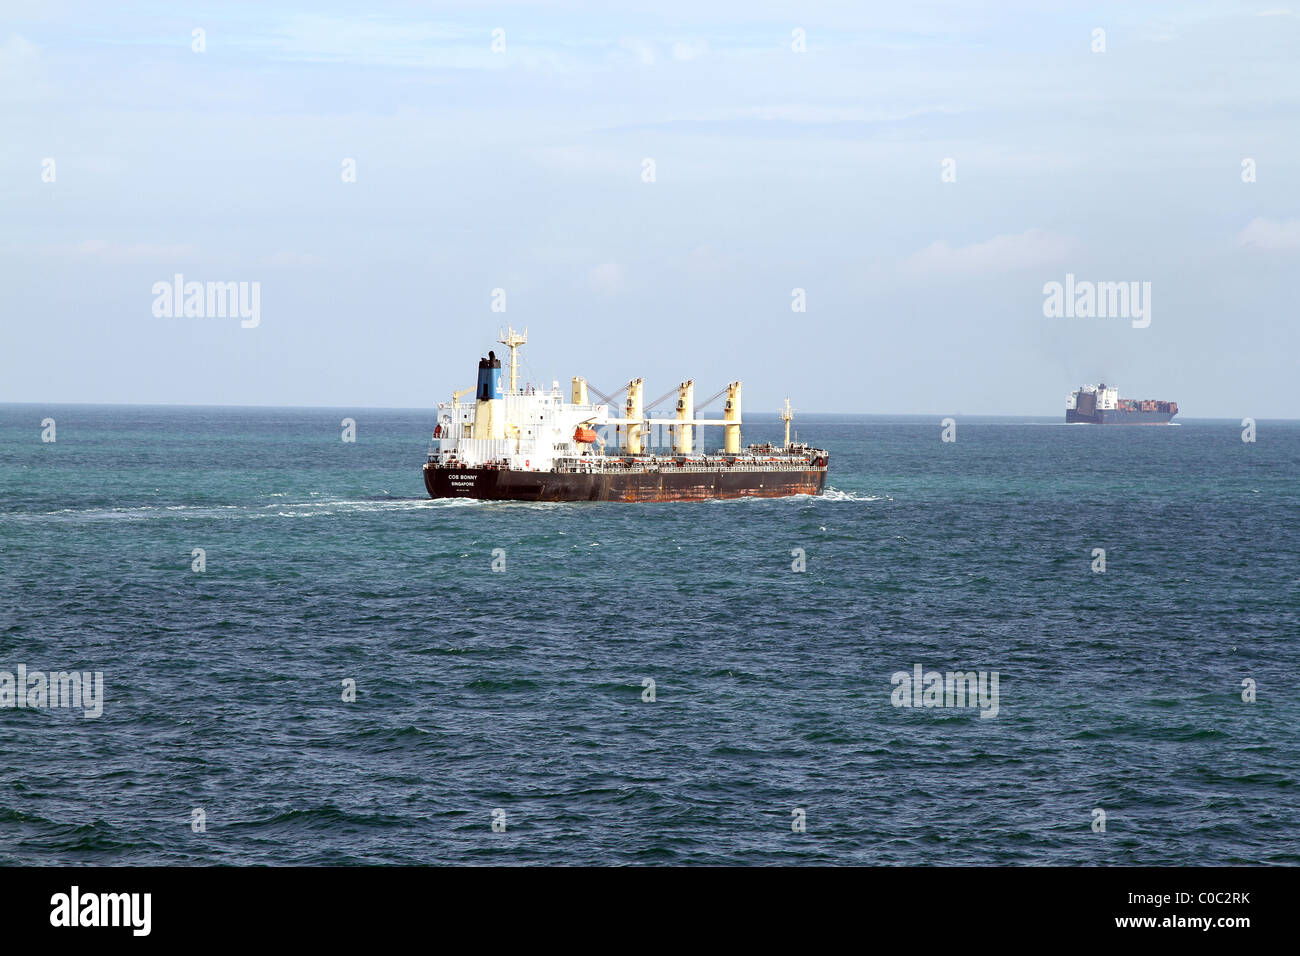 Sea shipping traffic in the English Channel between Dover, UK and Calais, France Stock Photo